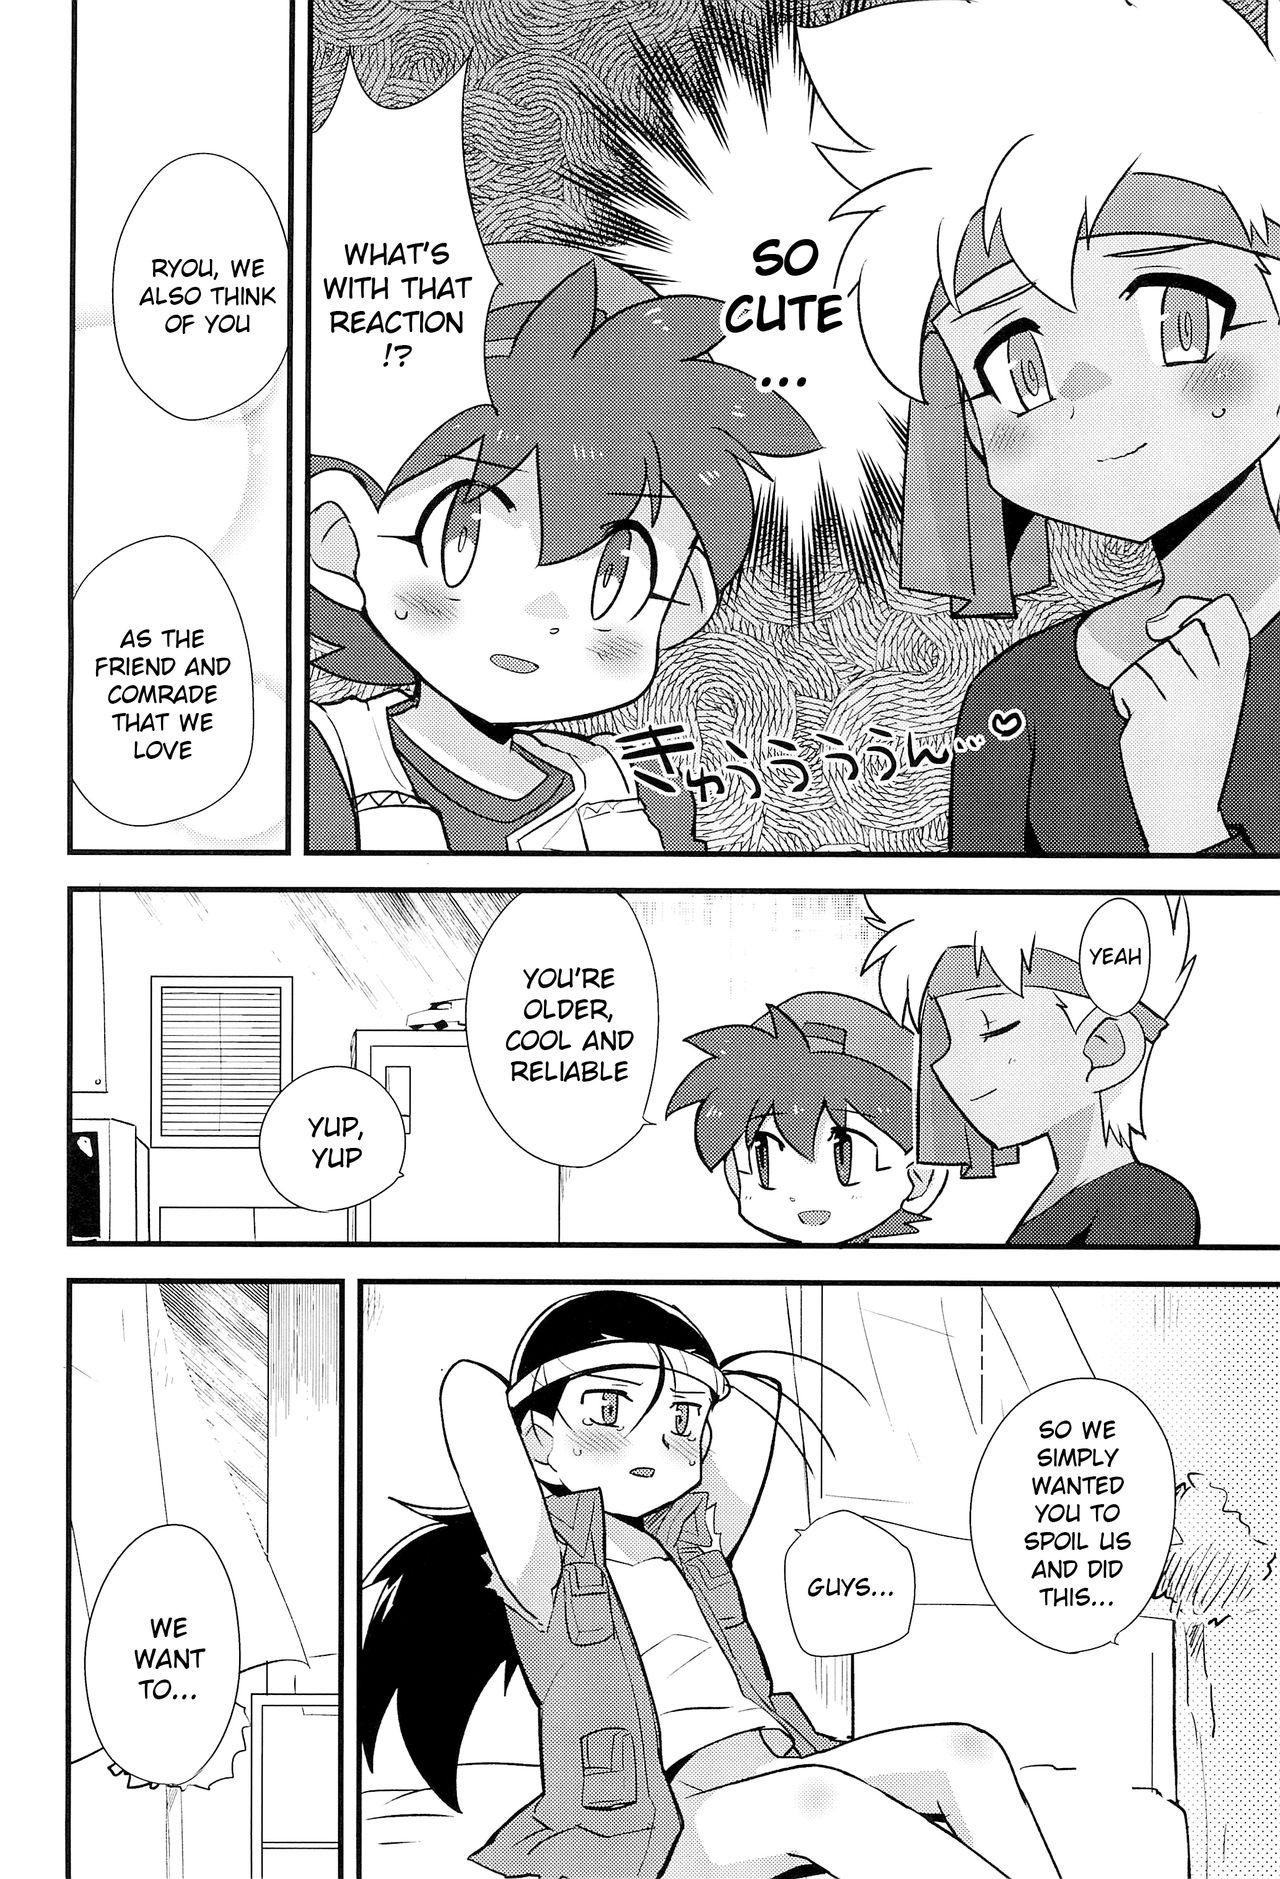 Caught Try Shichau? | Wanna Try It? - Bakusou kyoudai lets and go Underwear - Page 11